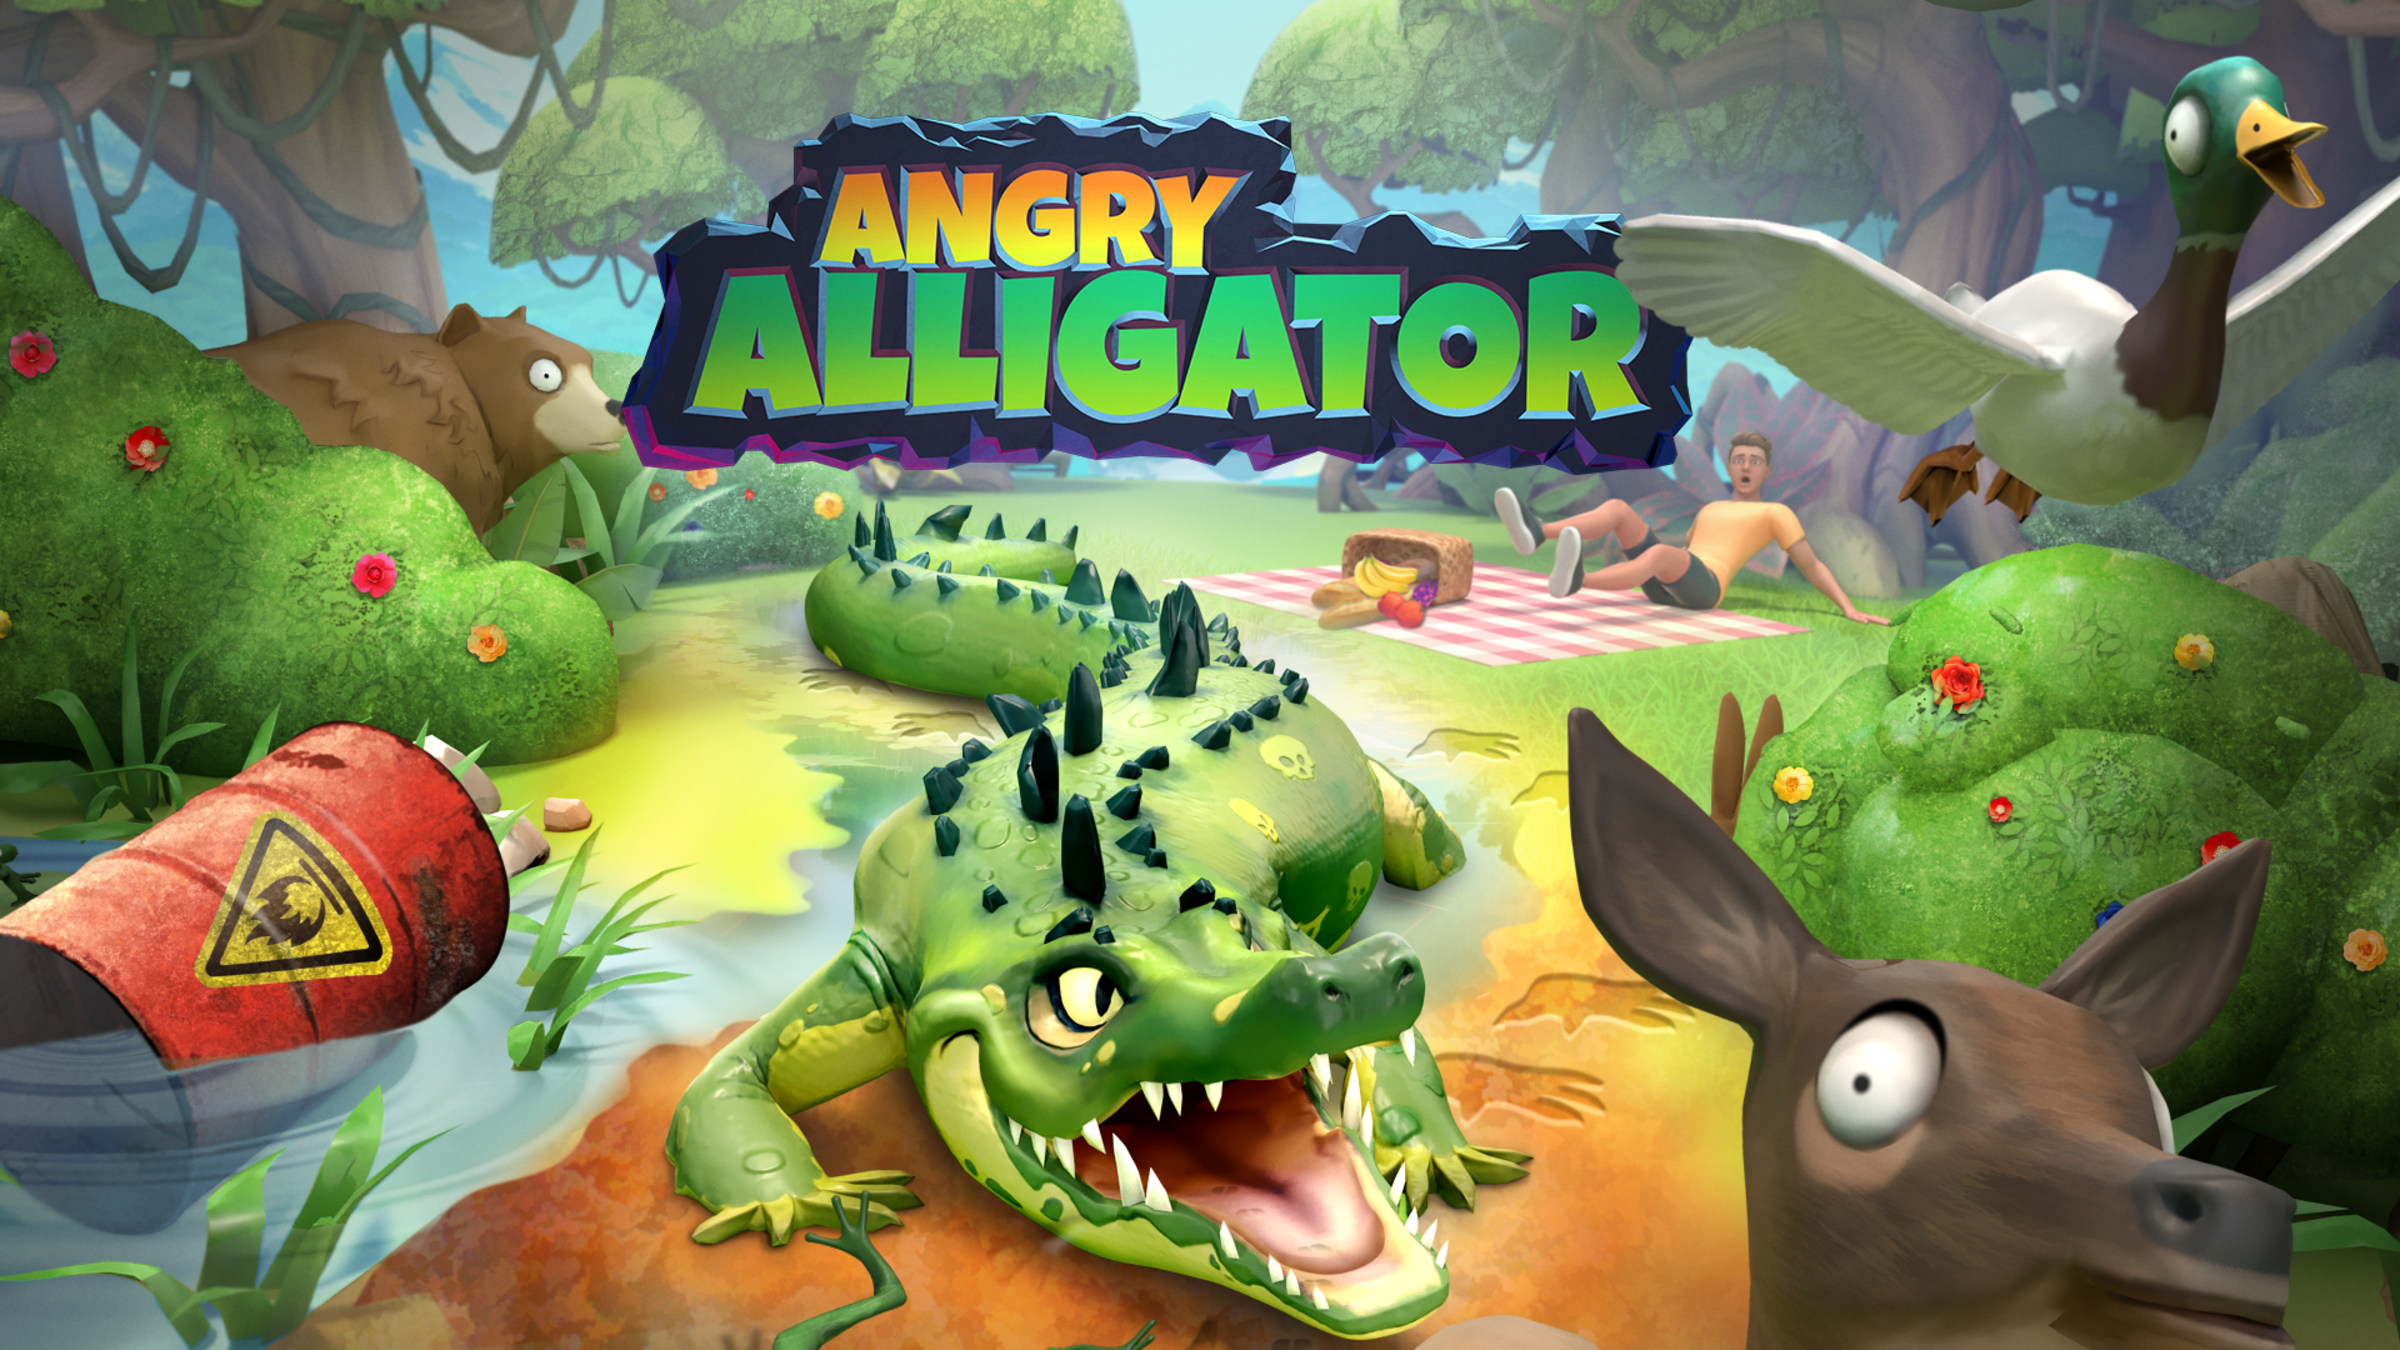 Angry Alligator for Nintendo Switch - Nintendo Official Site